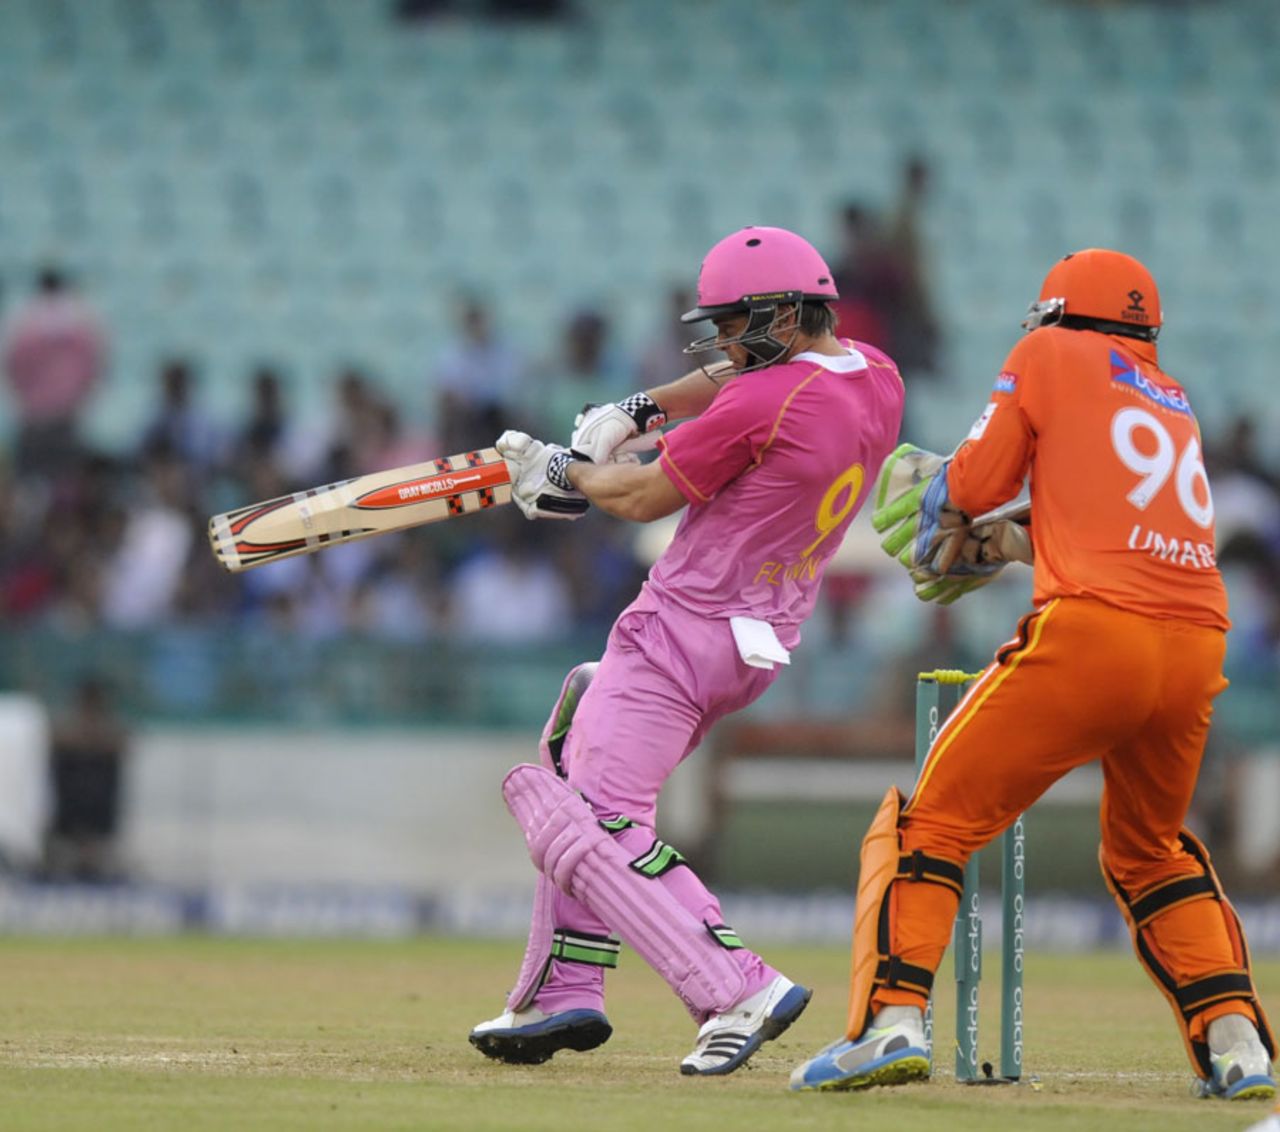 Daniel Flynn goes on the attack, Northern Knights v Lahore Lions, CLT20, Raipur, September 14, 2014